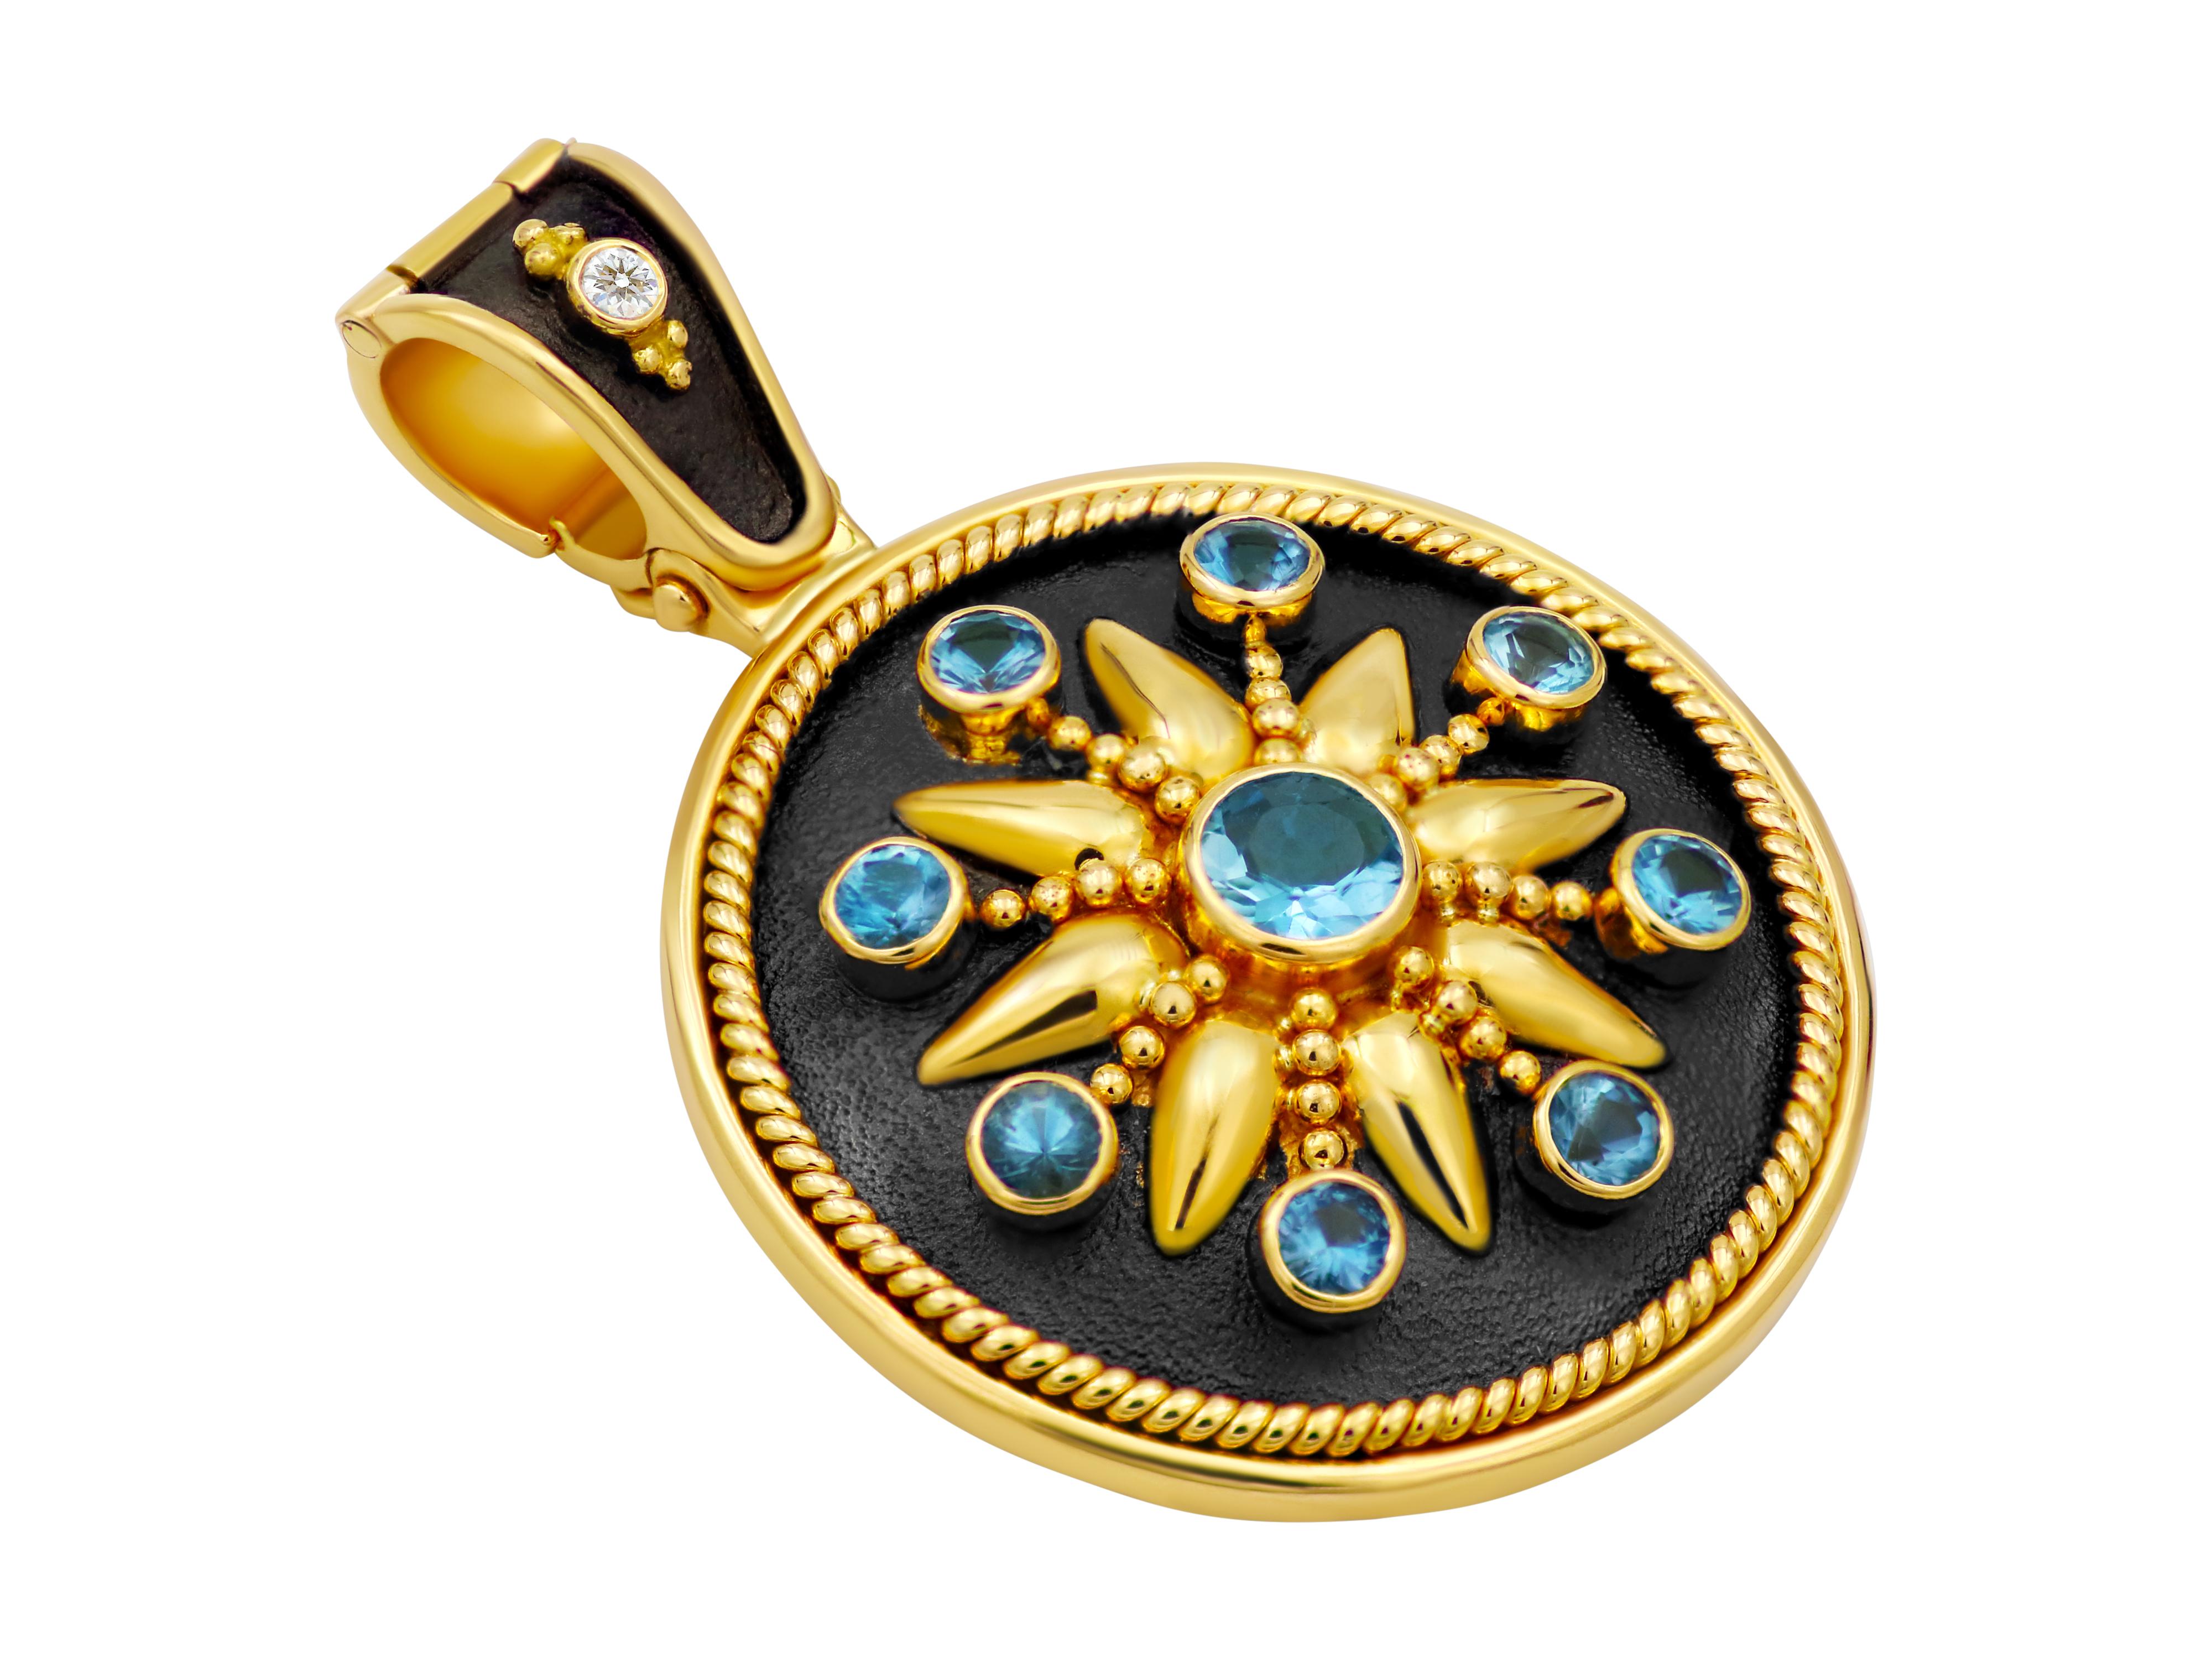 Noir collection pendant in 18 karat yellow gold with 0.60 carats aquamarines. A mystique total look is created by this beautiful gemstone and a dramatic contrast between the gold and the black platinum finish. The bezel also opens and it’s decorated